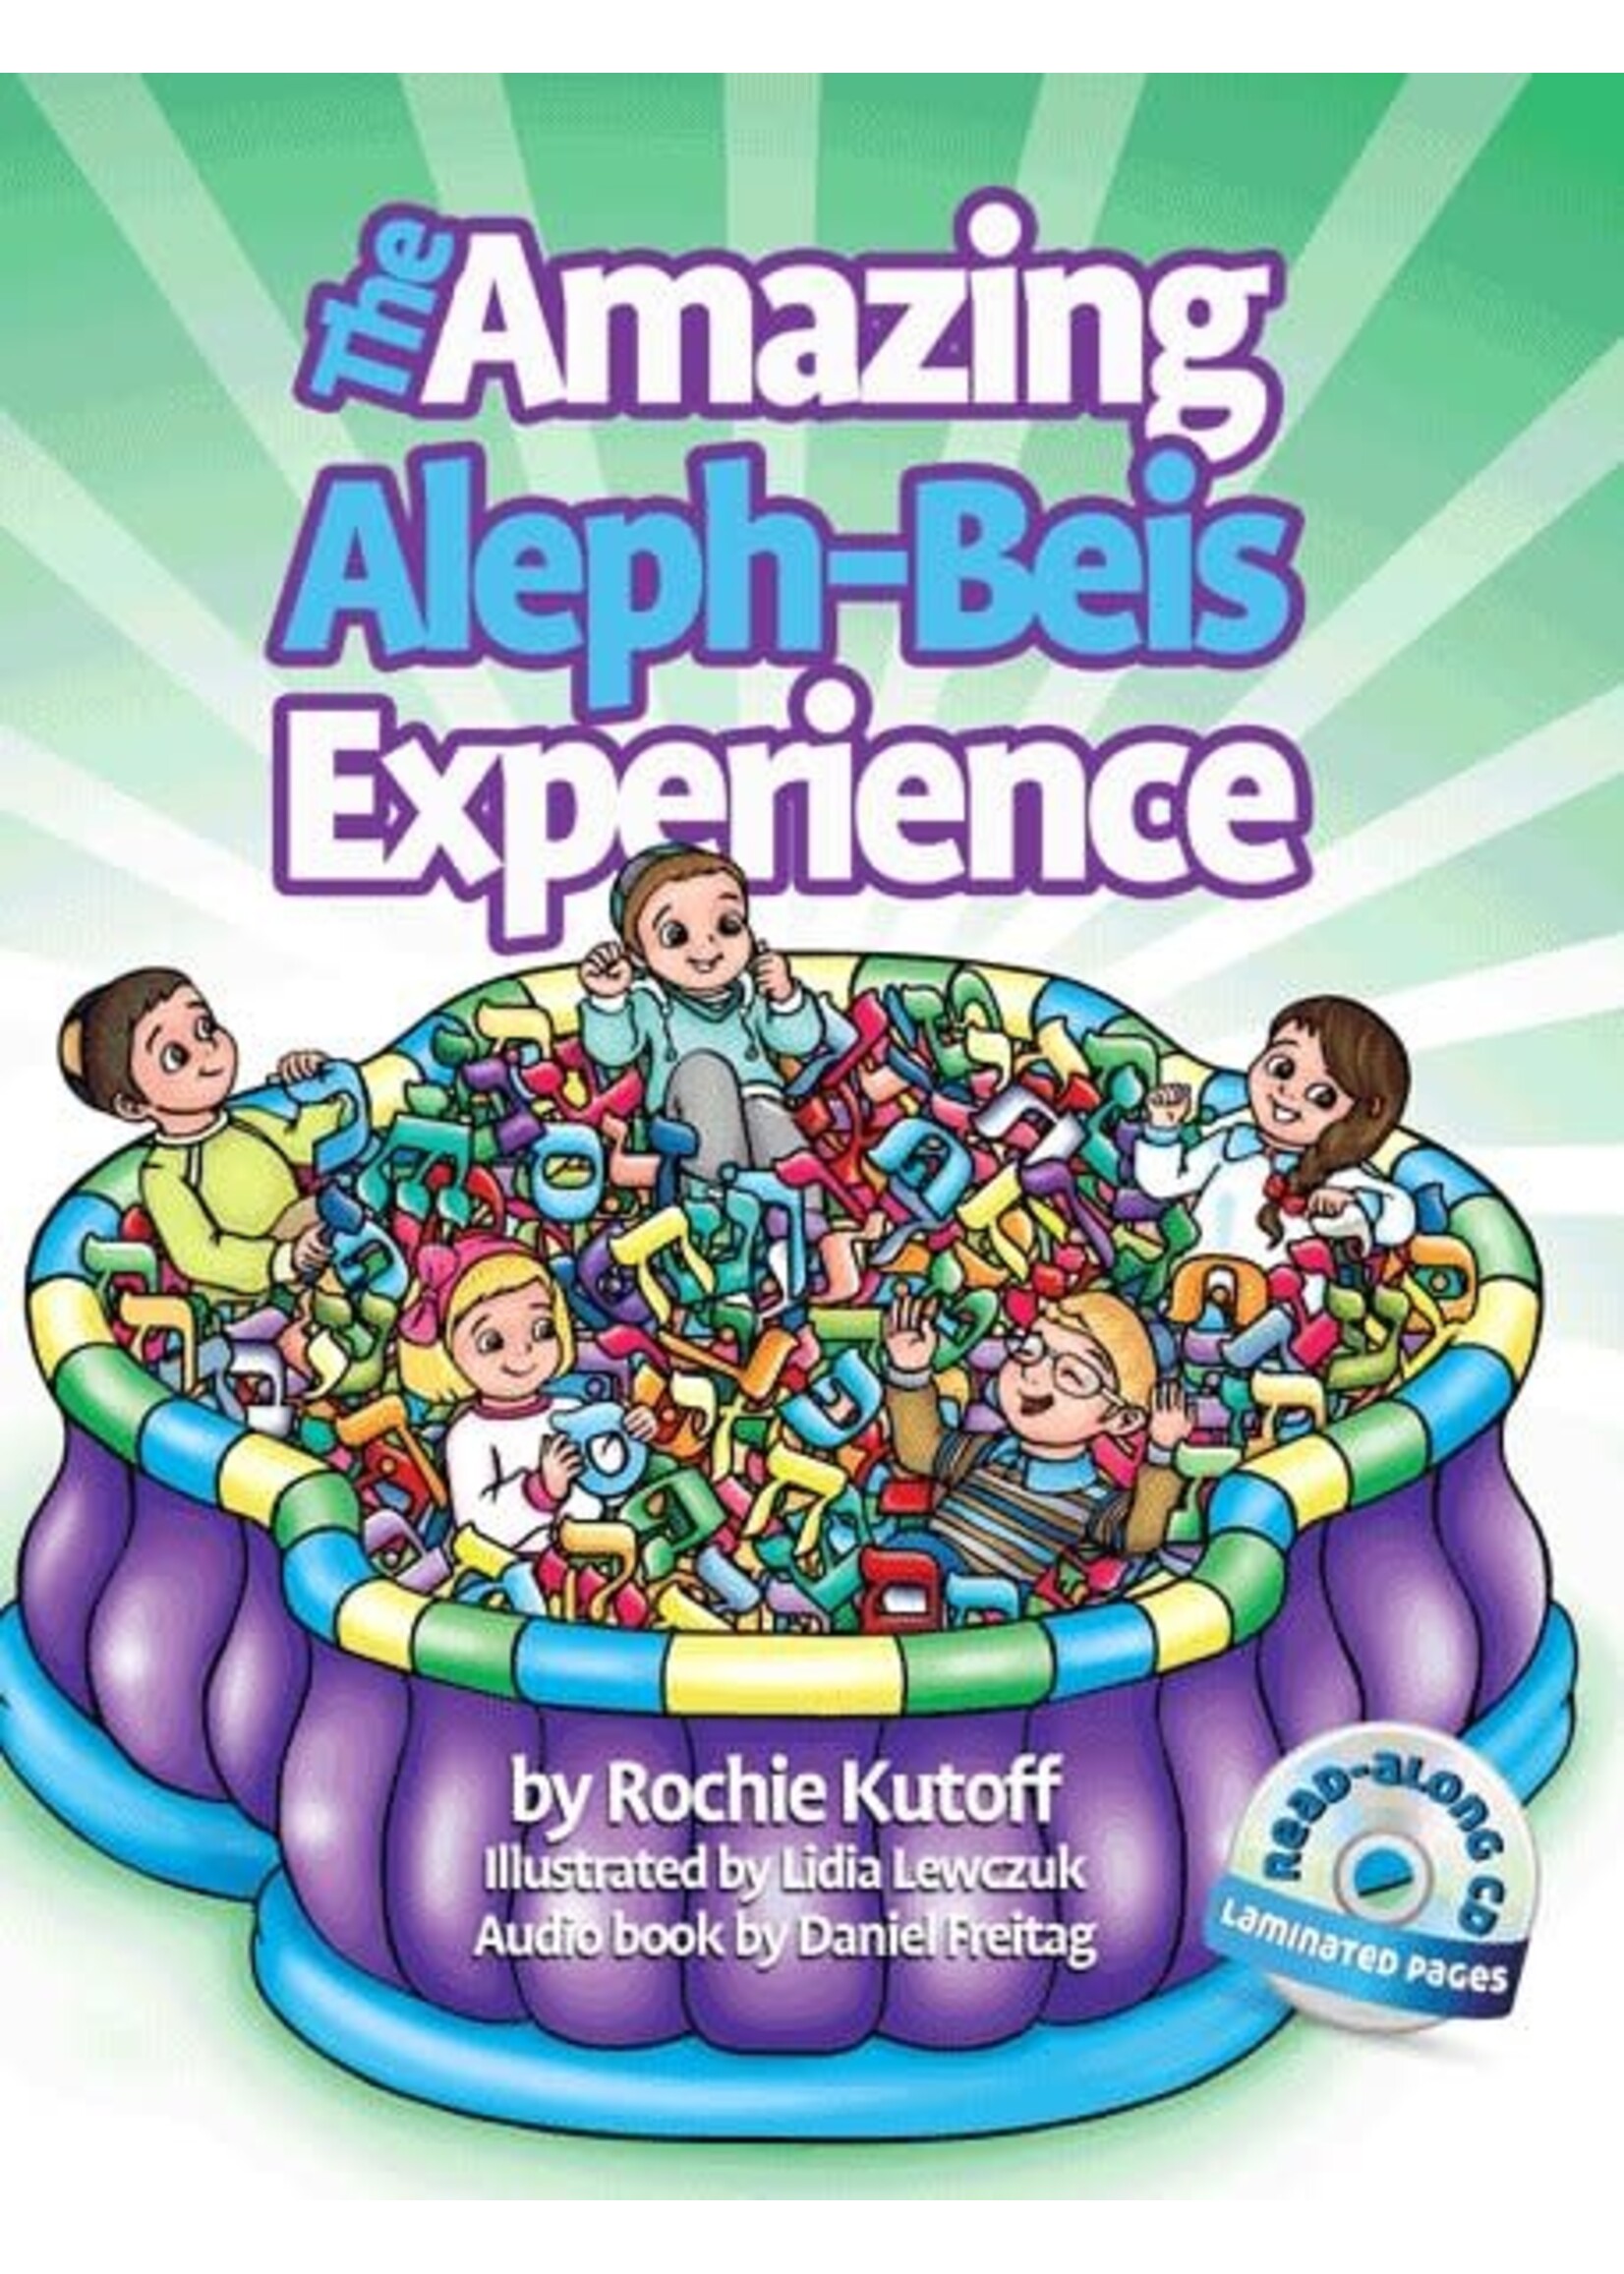 THE AMAZING ALEPH-BEIS EXPERIENCE